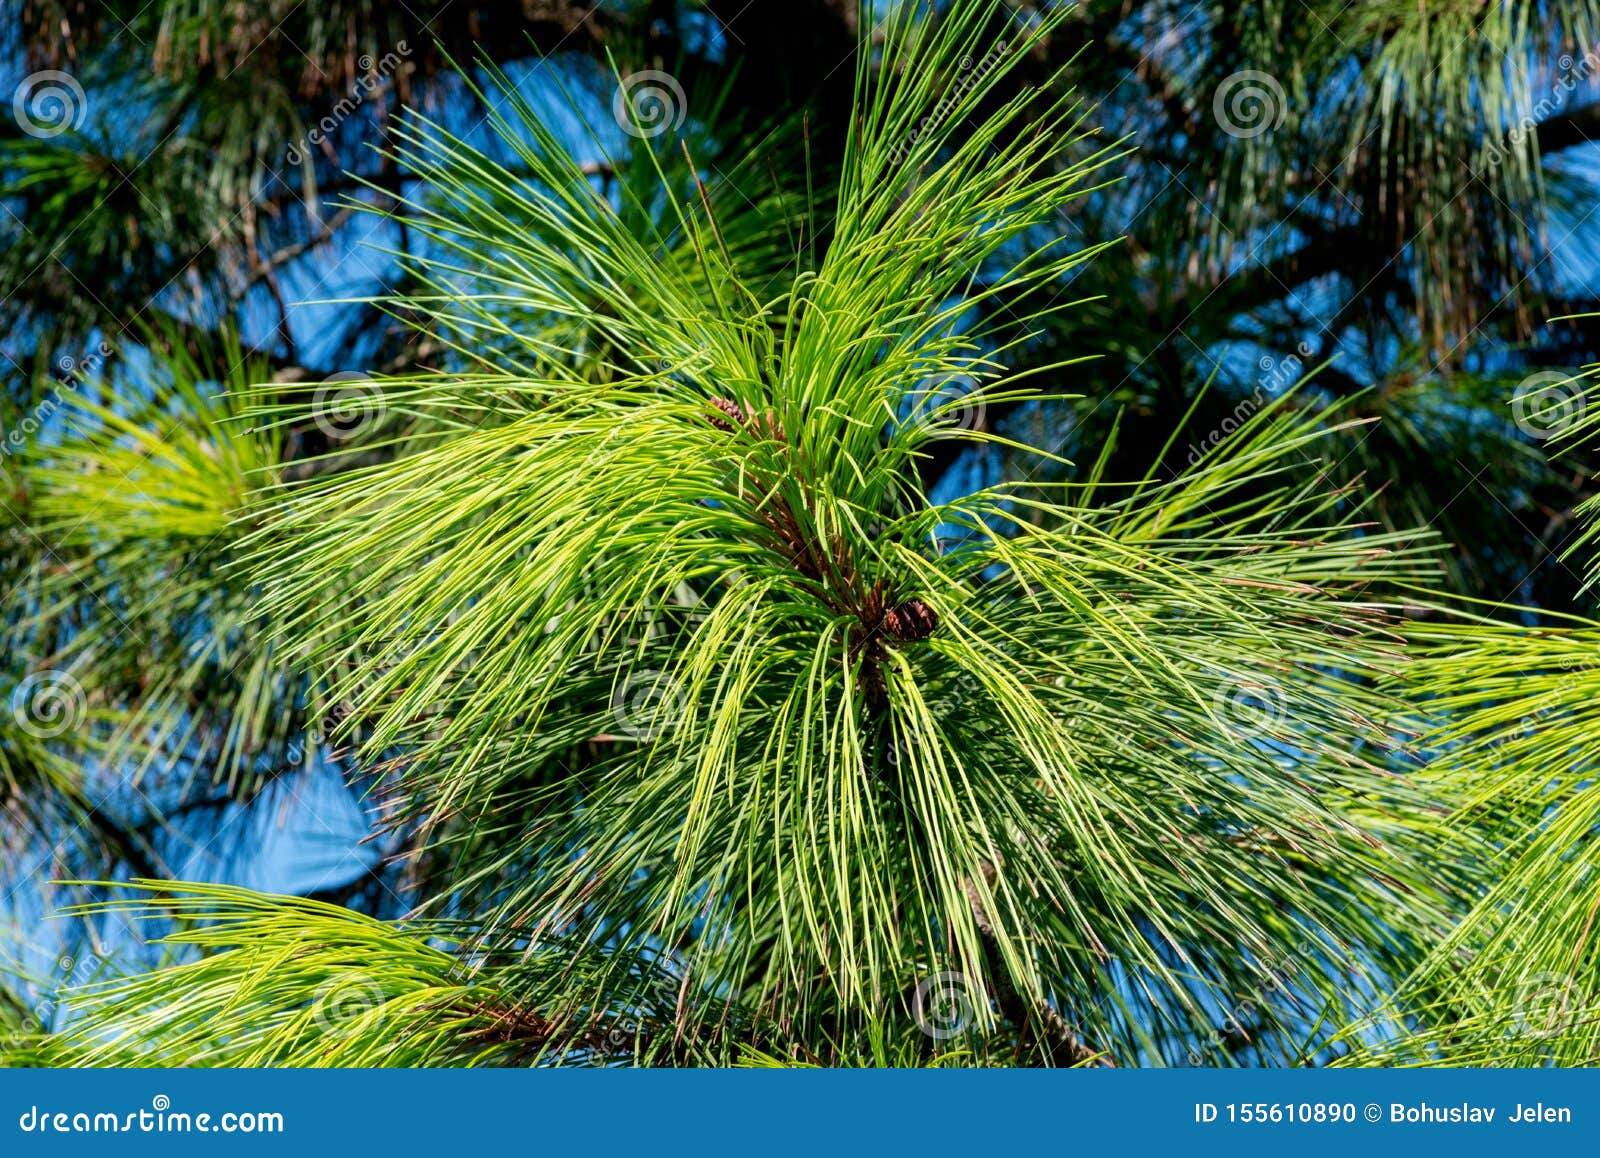 long twisted and serrated needles of red pine tree at a sunny summer day. pinus resinosa from pinaceae family,